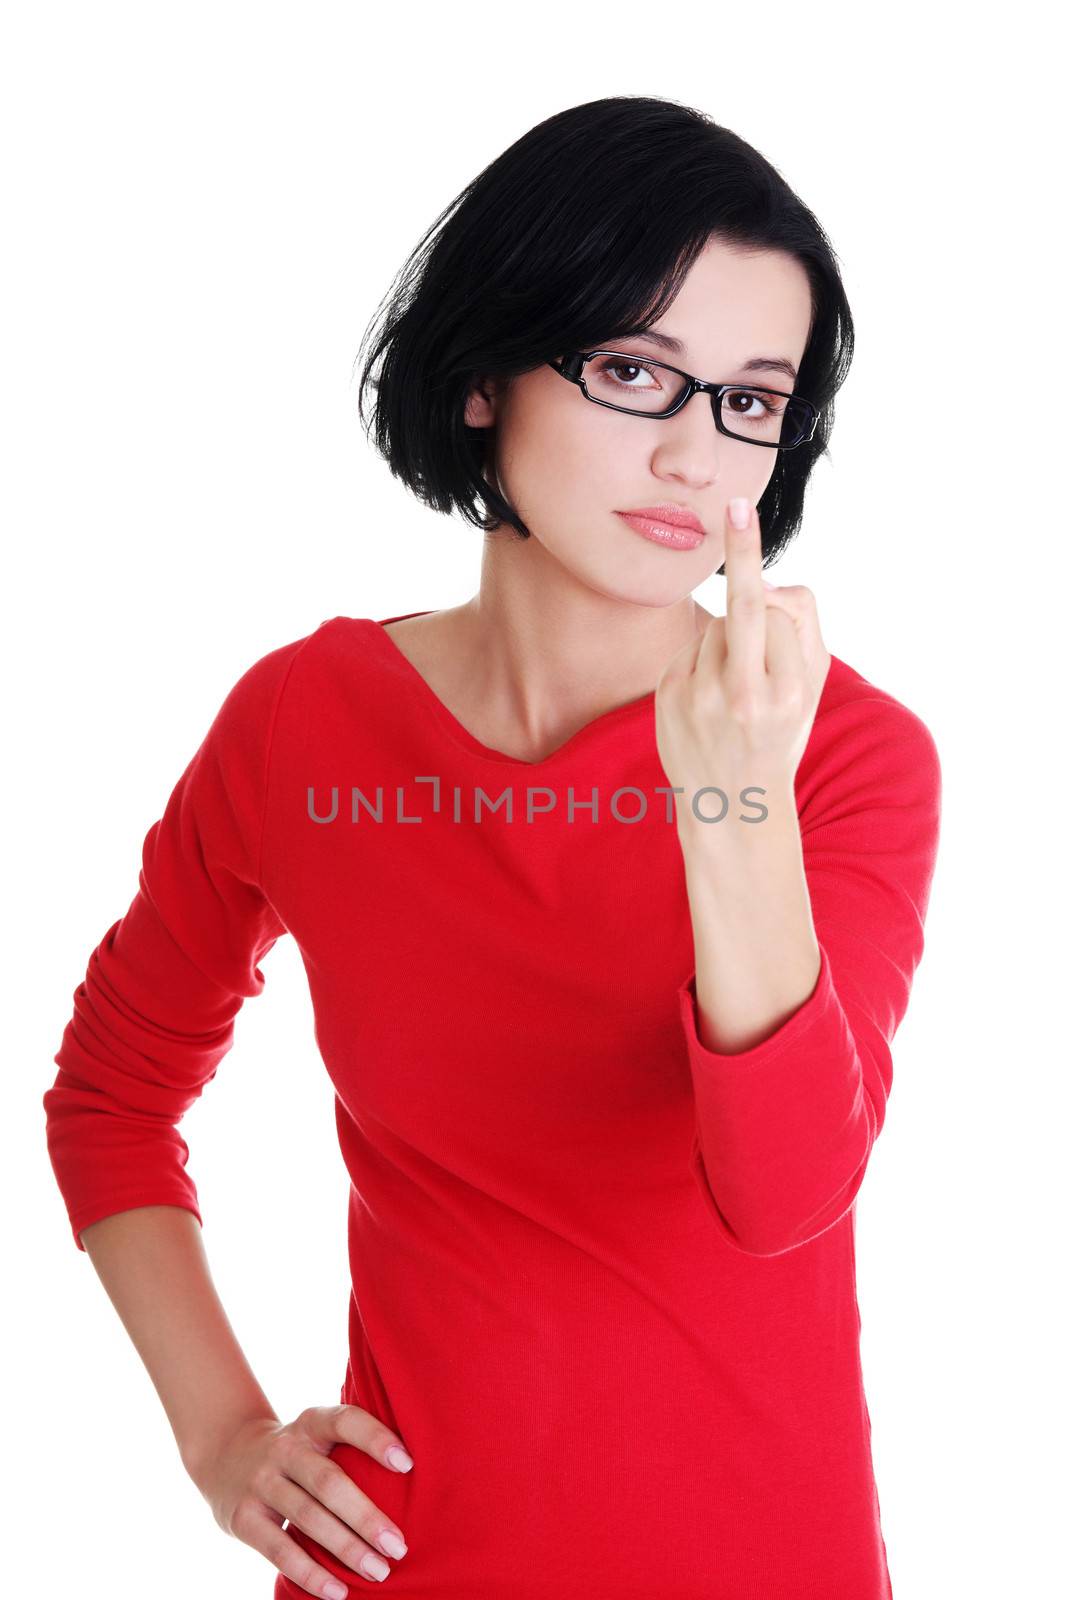 Teen girl with middle finger up, isolated on white background